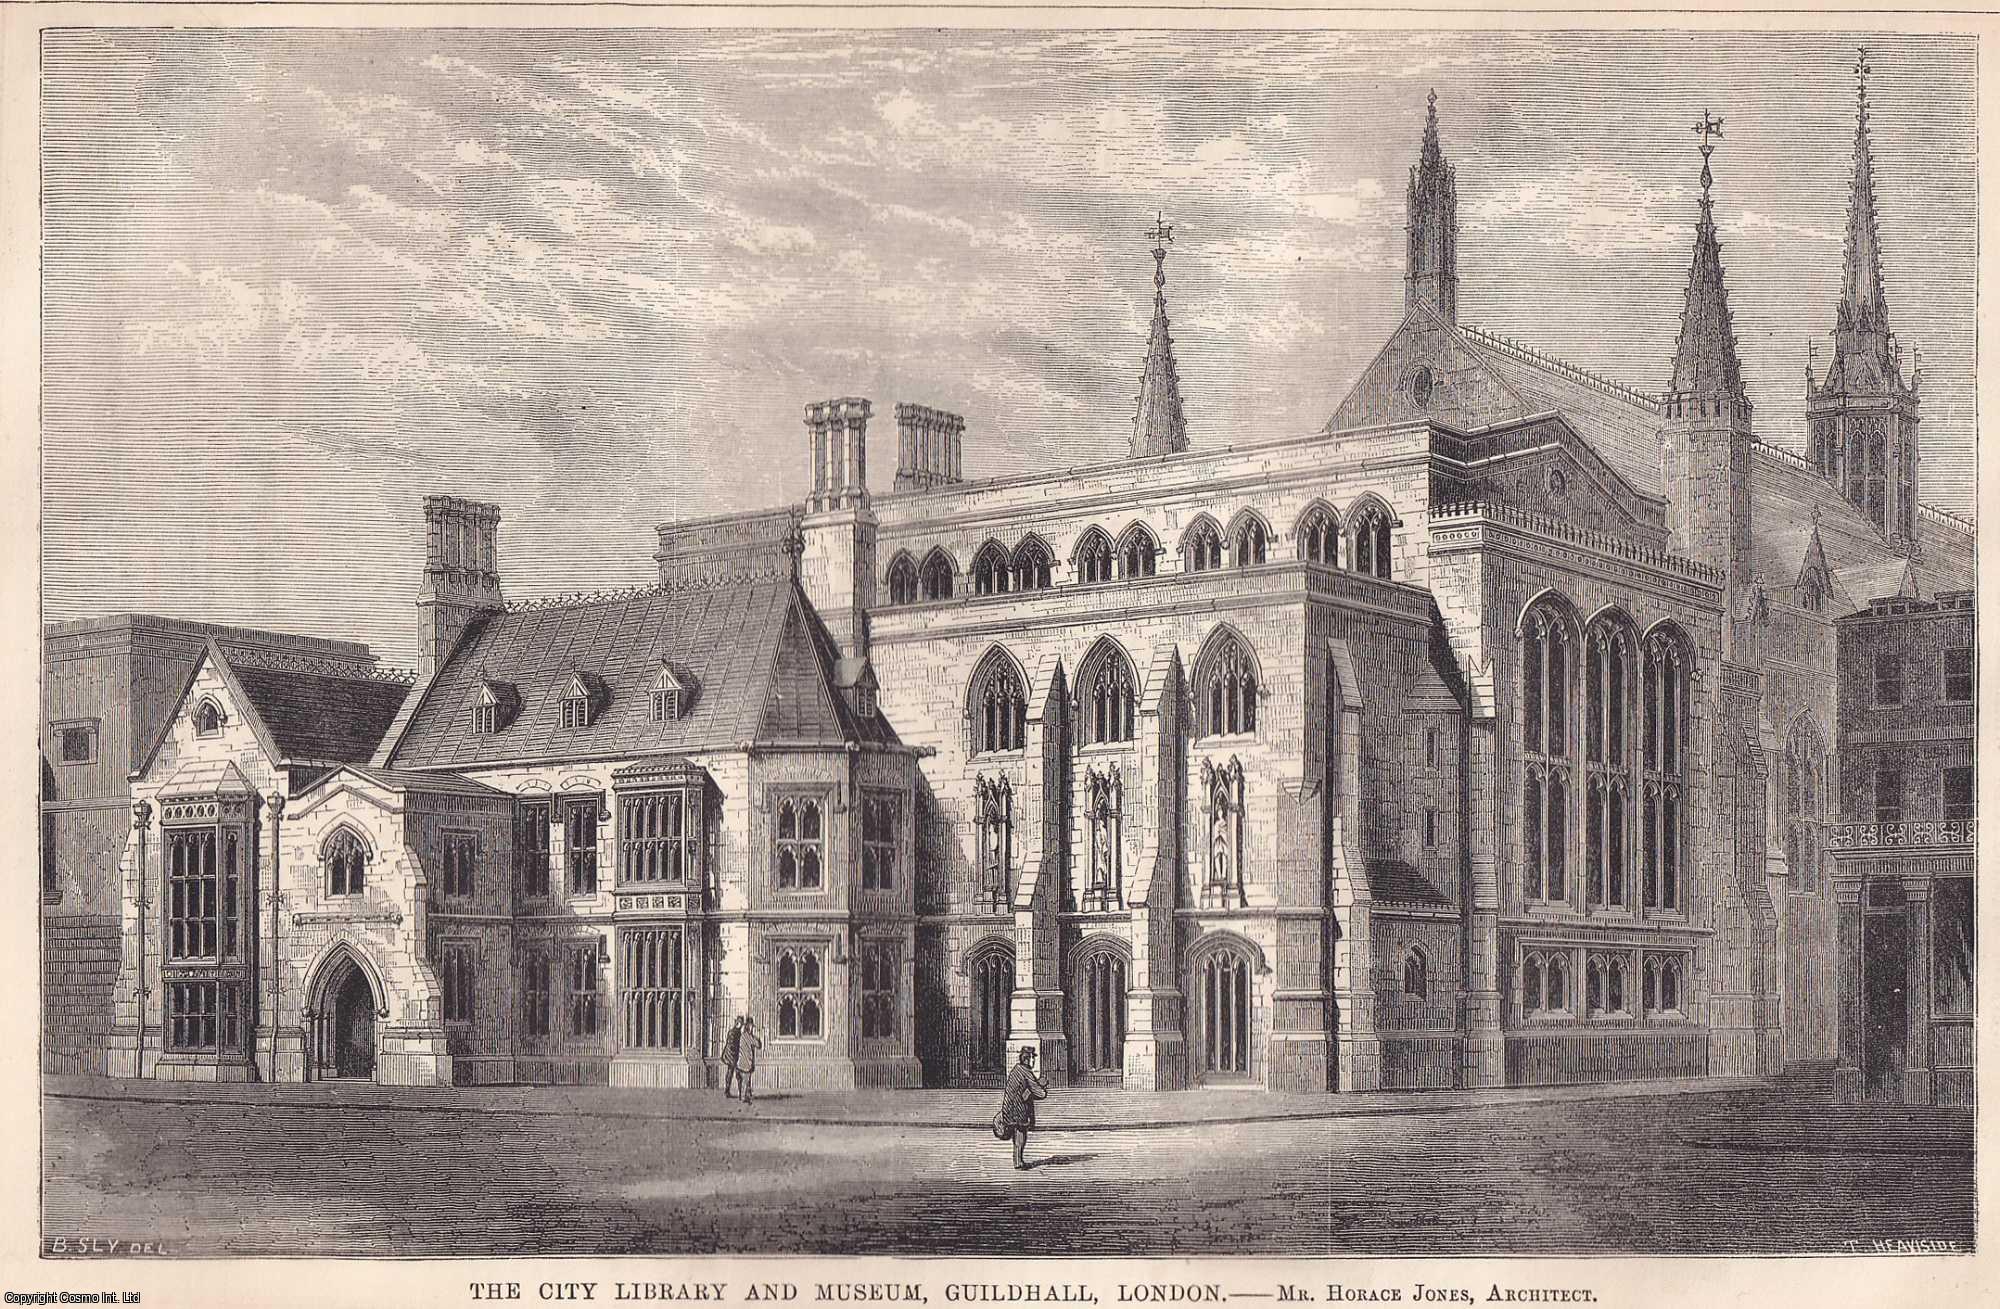 GUILDHALL LIBRARY - 1870 : The City Library & Museum, Guildhall, London. Horace Jones, Architect. An original page from The Builder. An Illustrated Weekly Magazine, for the Architect, Engineer, Archaeologist, Constructor, & Art-Lover. 1870.